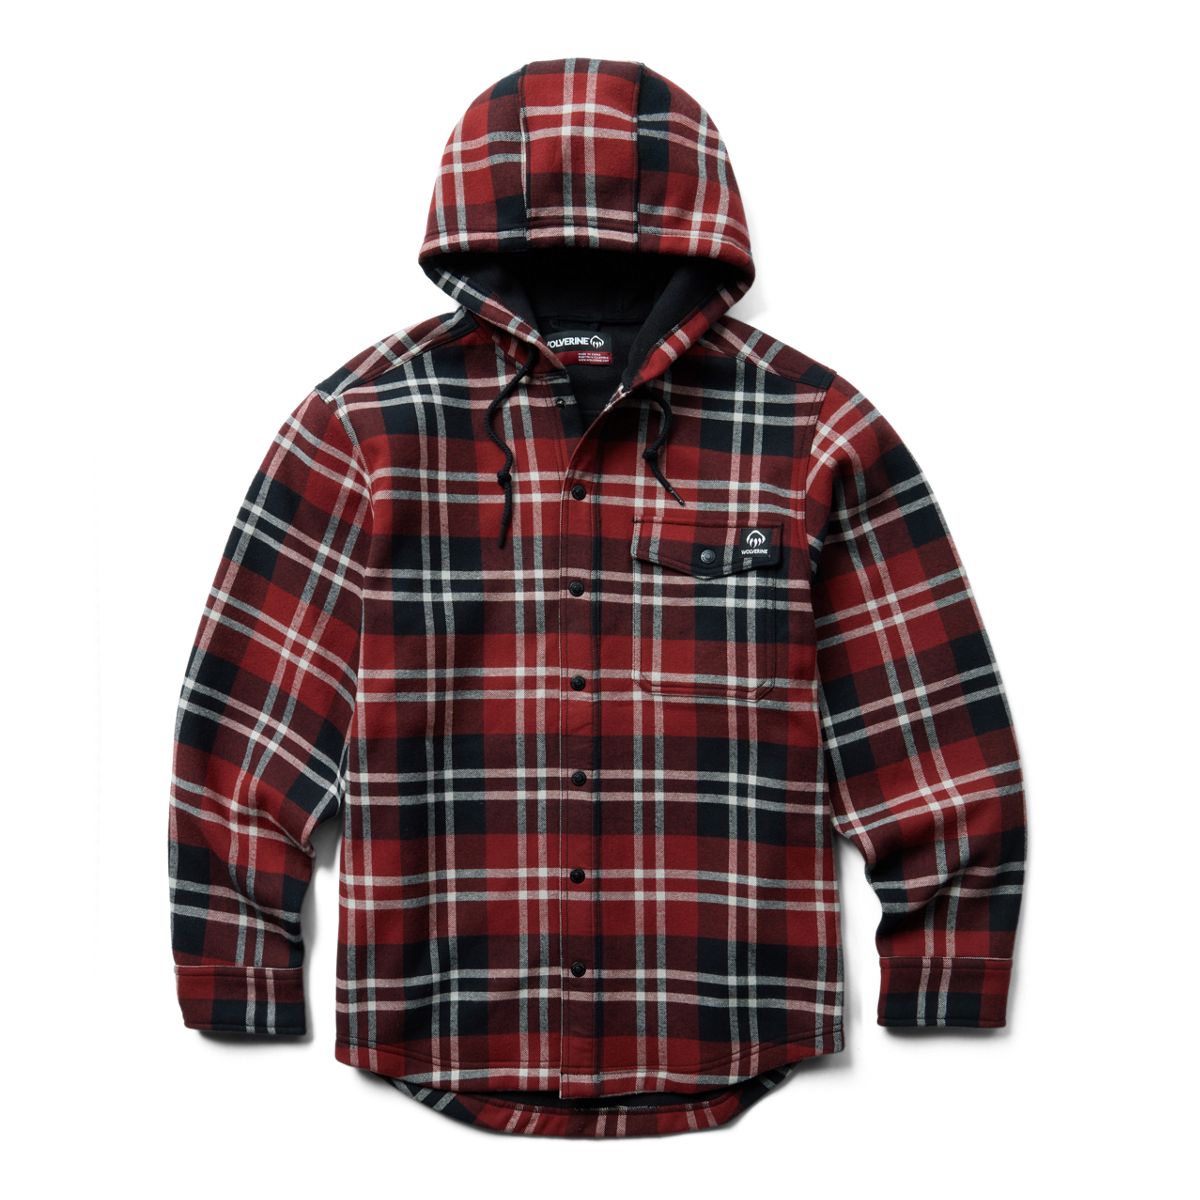 Hooded flannel shirt